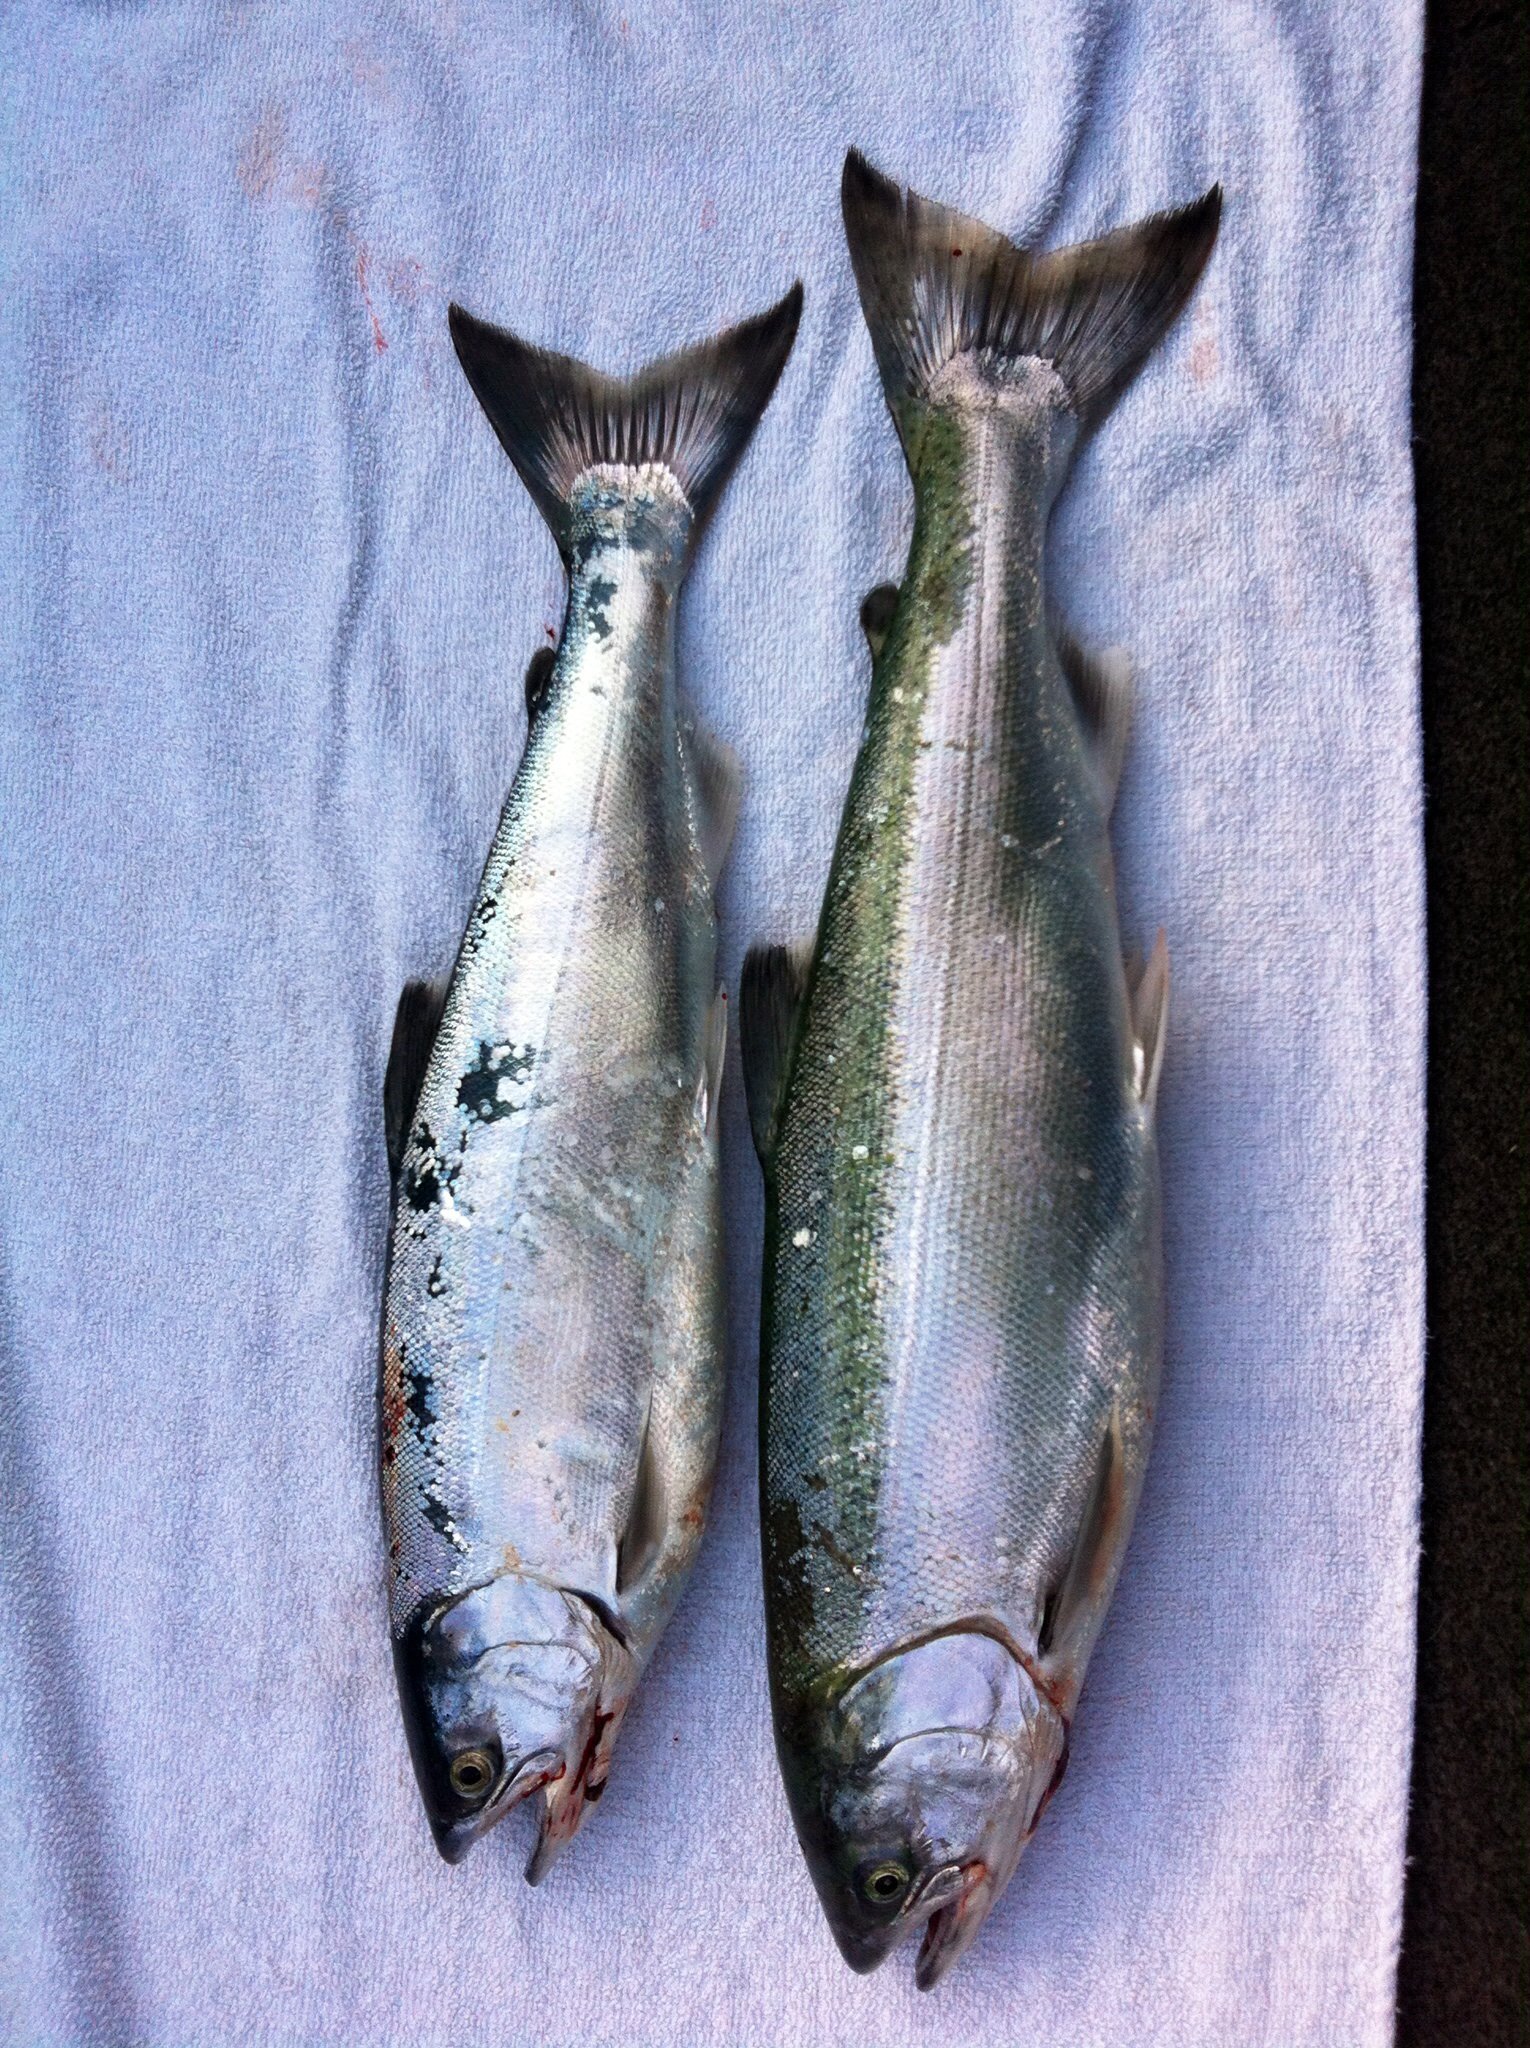 Coho, Rainbow or one of each? - General Discussion Forum - General